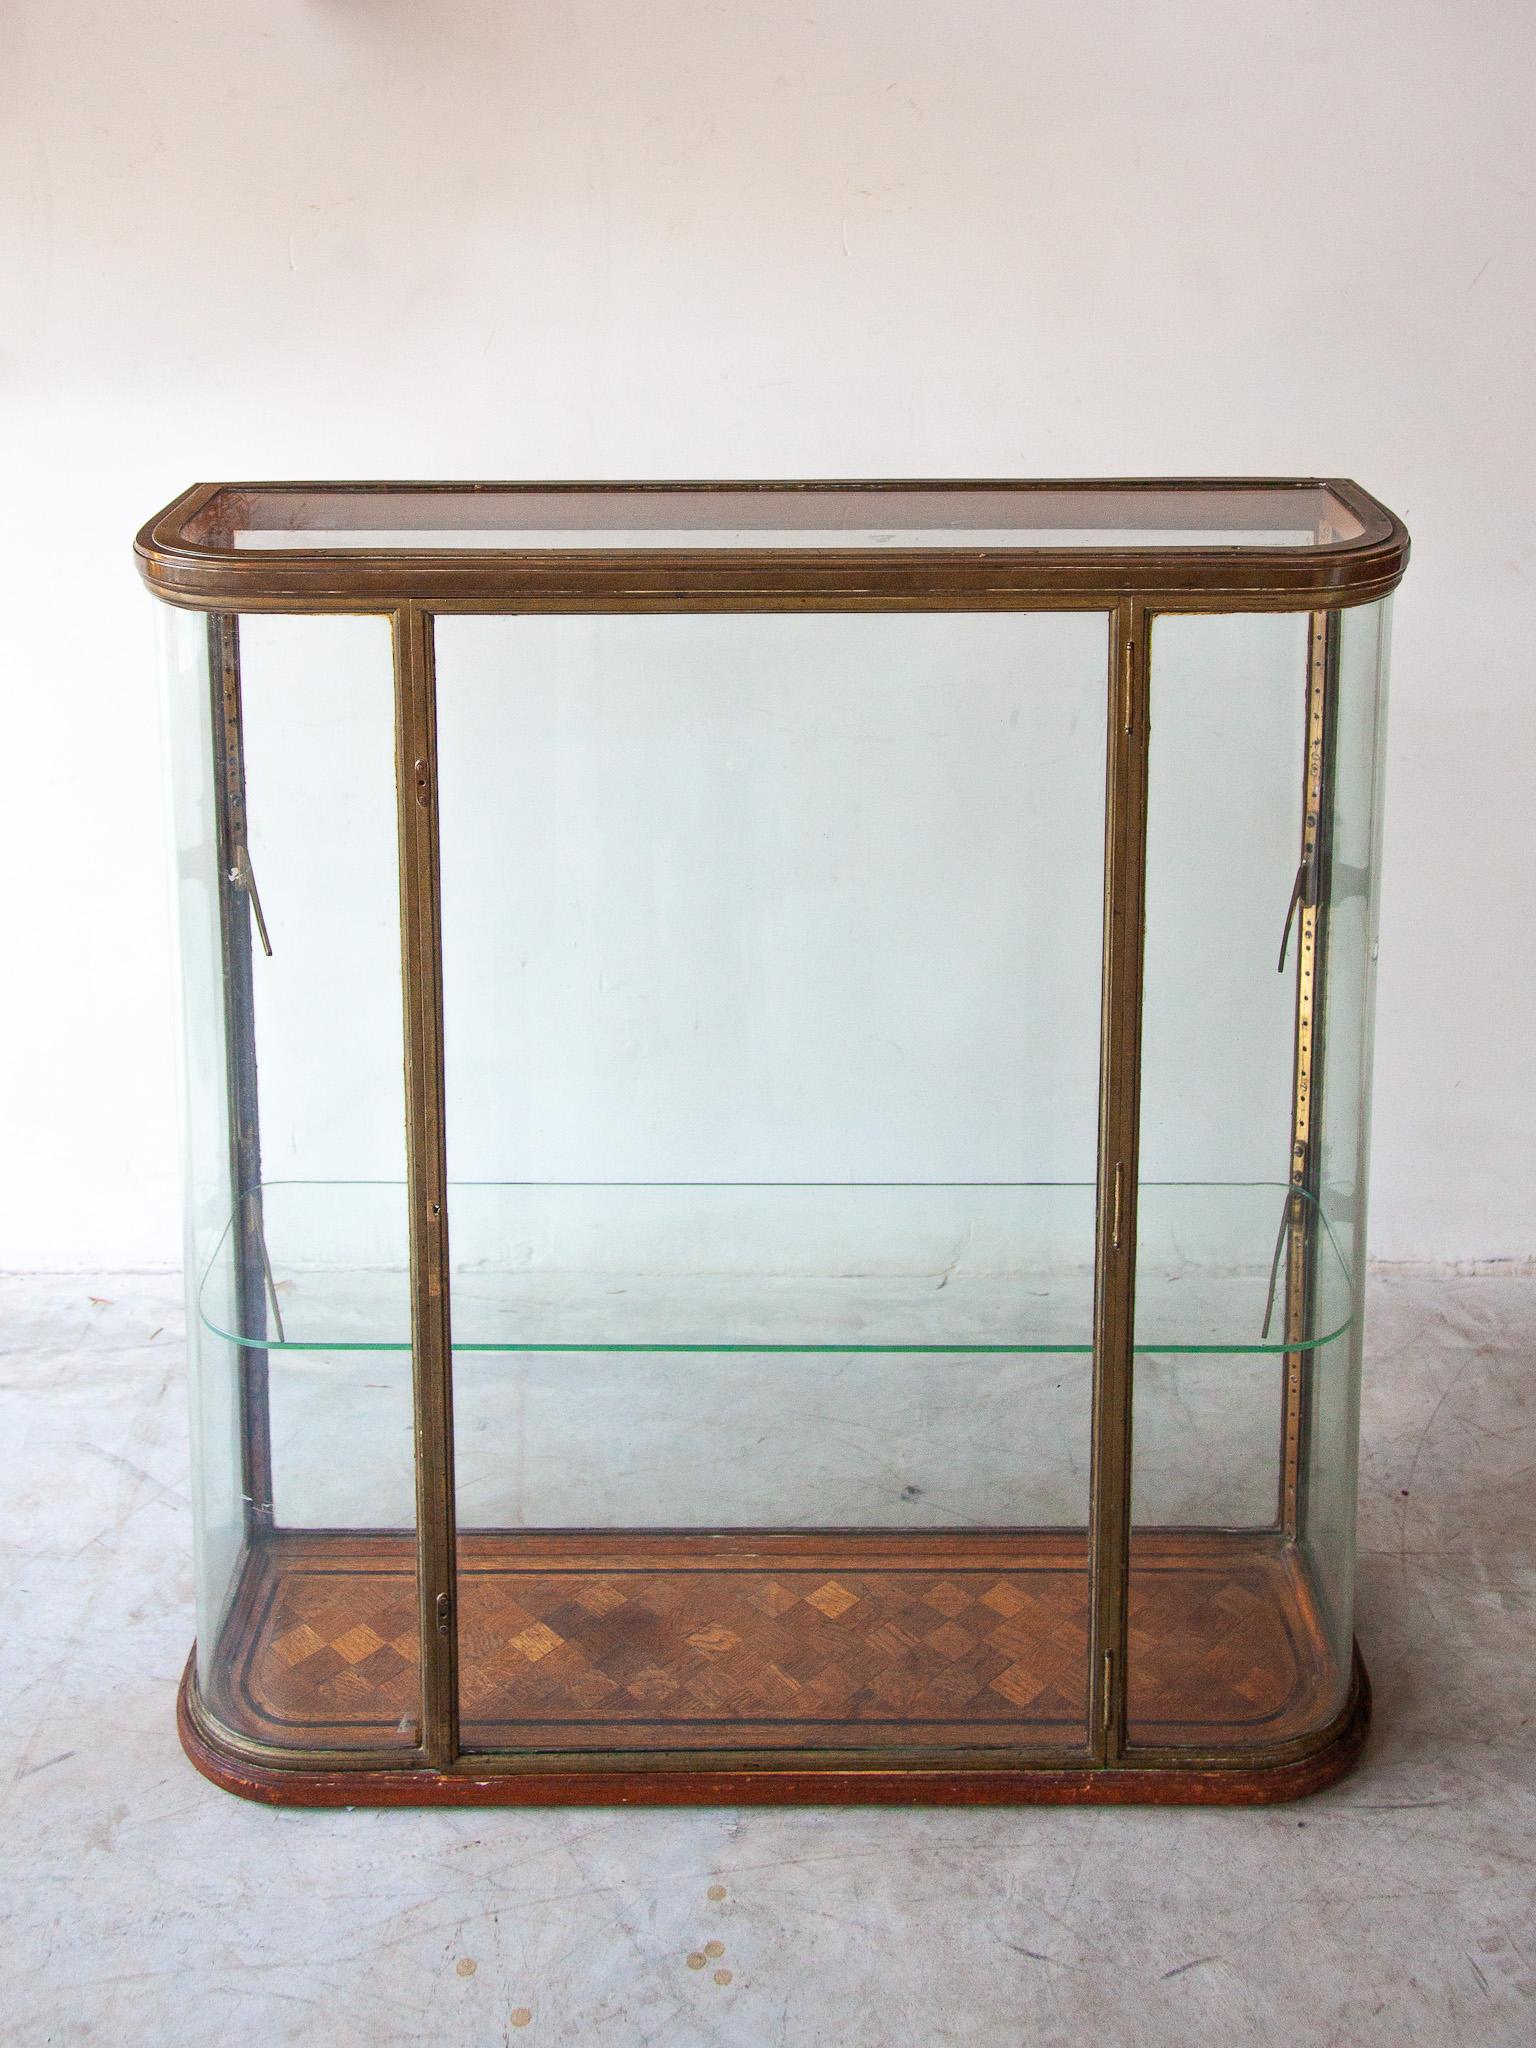 Beautiful bronze antique table display vitrine in glass with curved glass panels framed in bronze. This display showcase was once a part of a weapon-shop standing on the counter for the presentation of small model weapons in the 19th century. Once